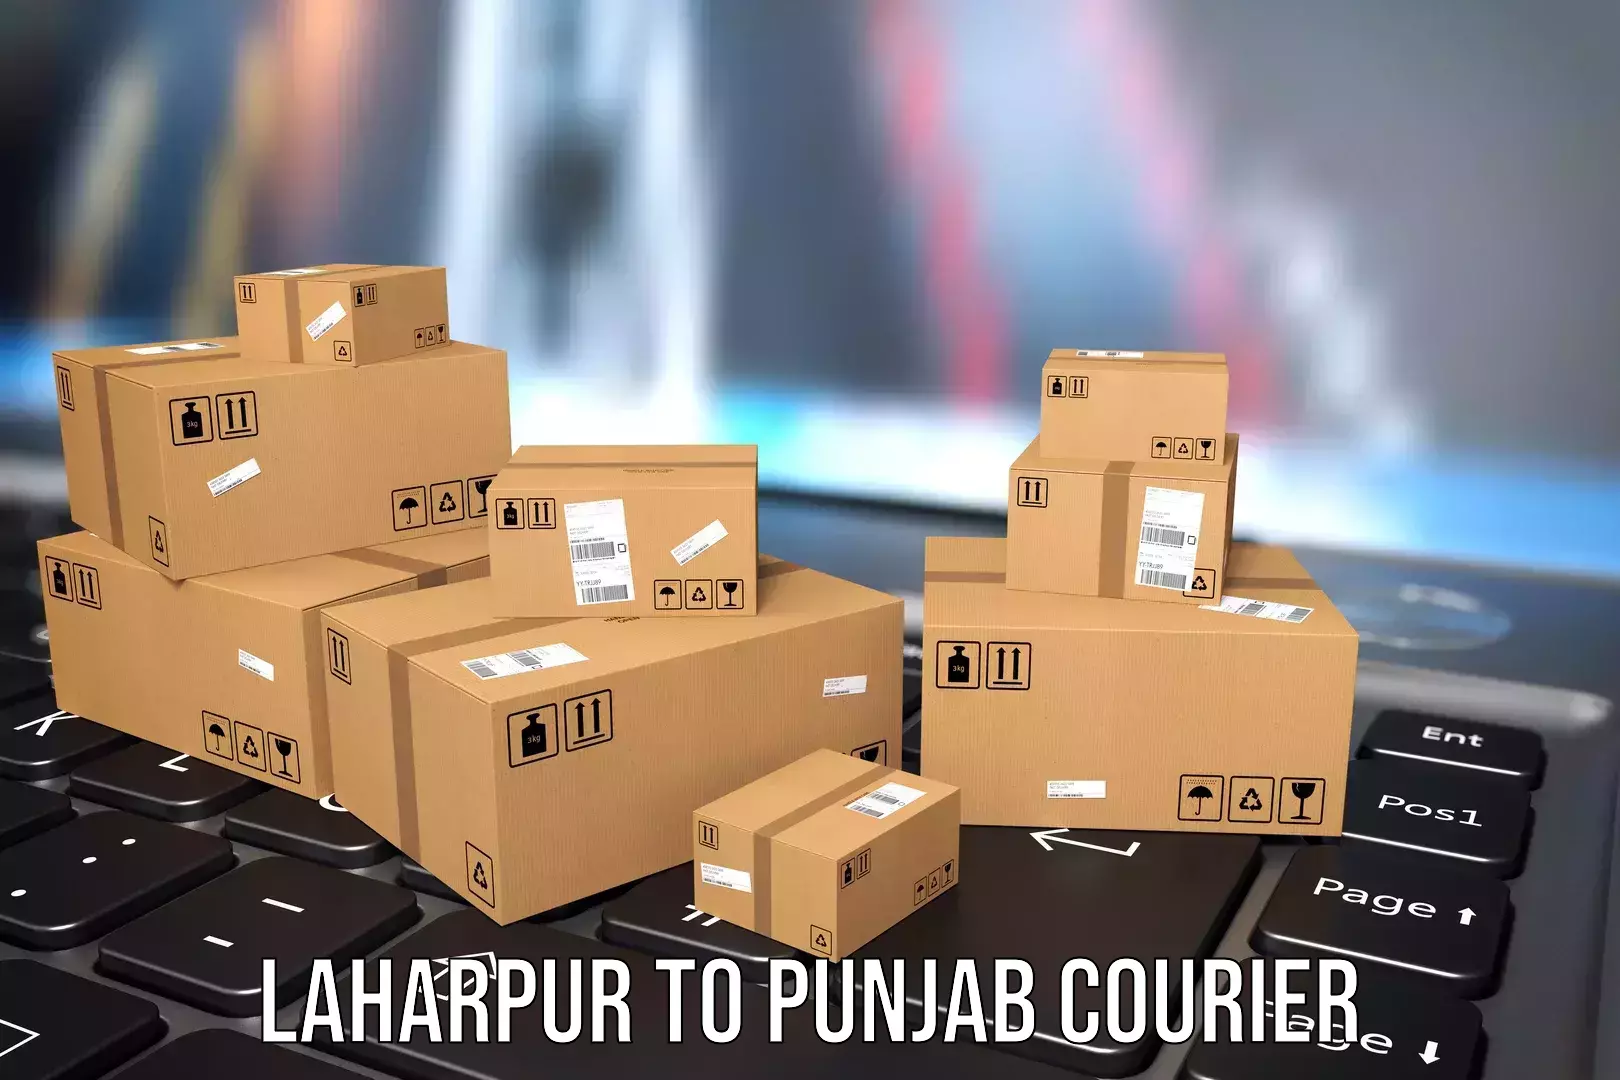 Luggage delivery system Laharpur to Nangal